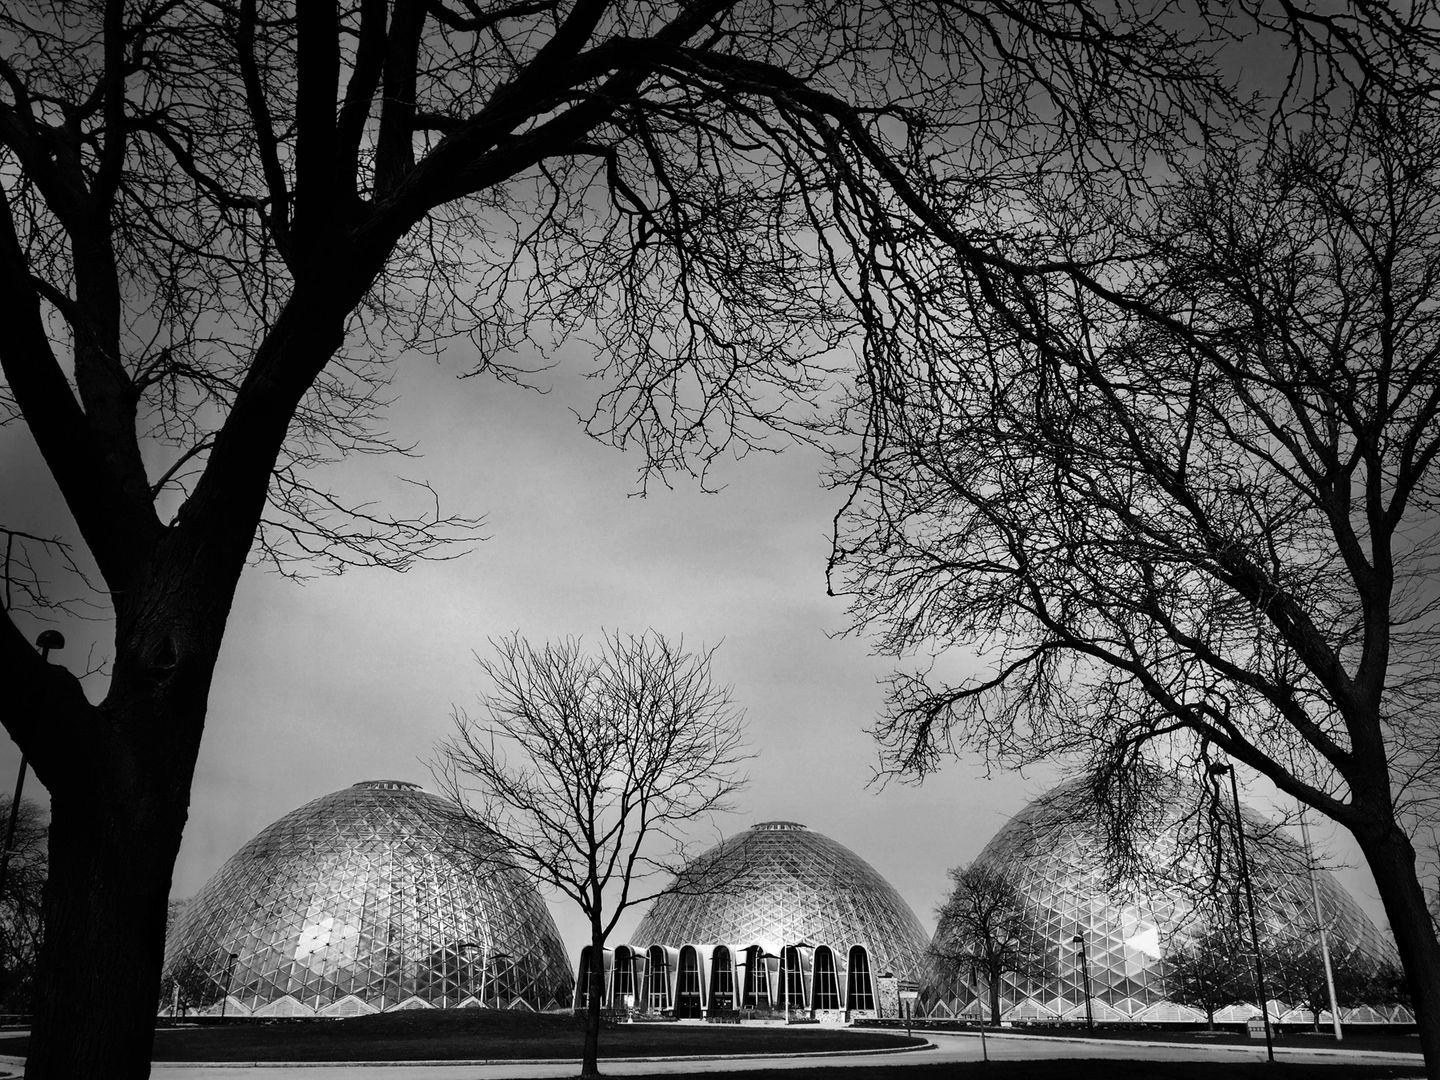 A black and white photo of trees in front of domes.